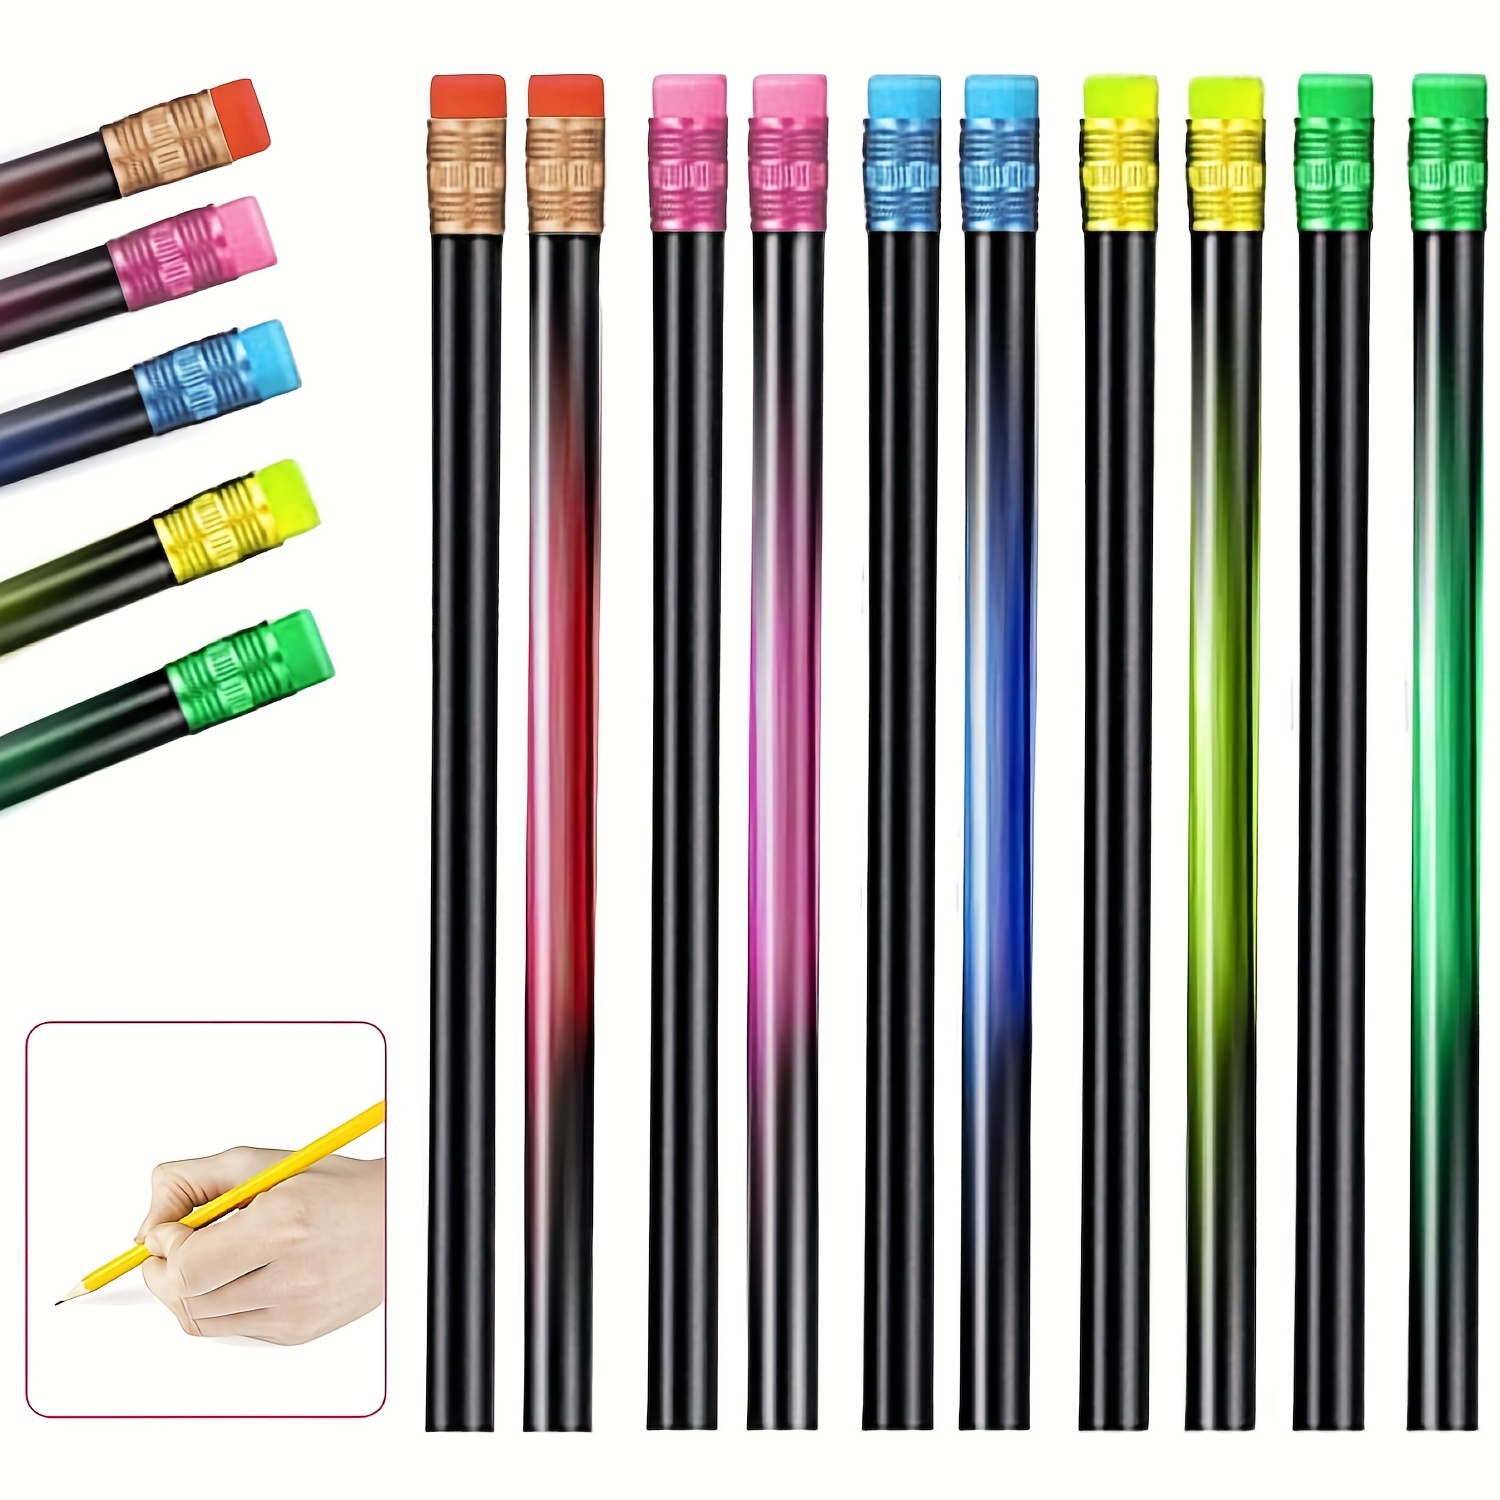 Flexible Bendy Pencil, 35 PCS Flexible Soft Pencil Colorful Stripe Soft  Pencils with Eraser as Gift for Students or Children